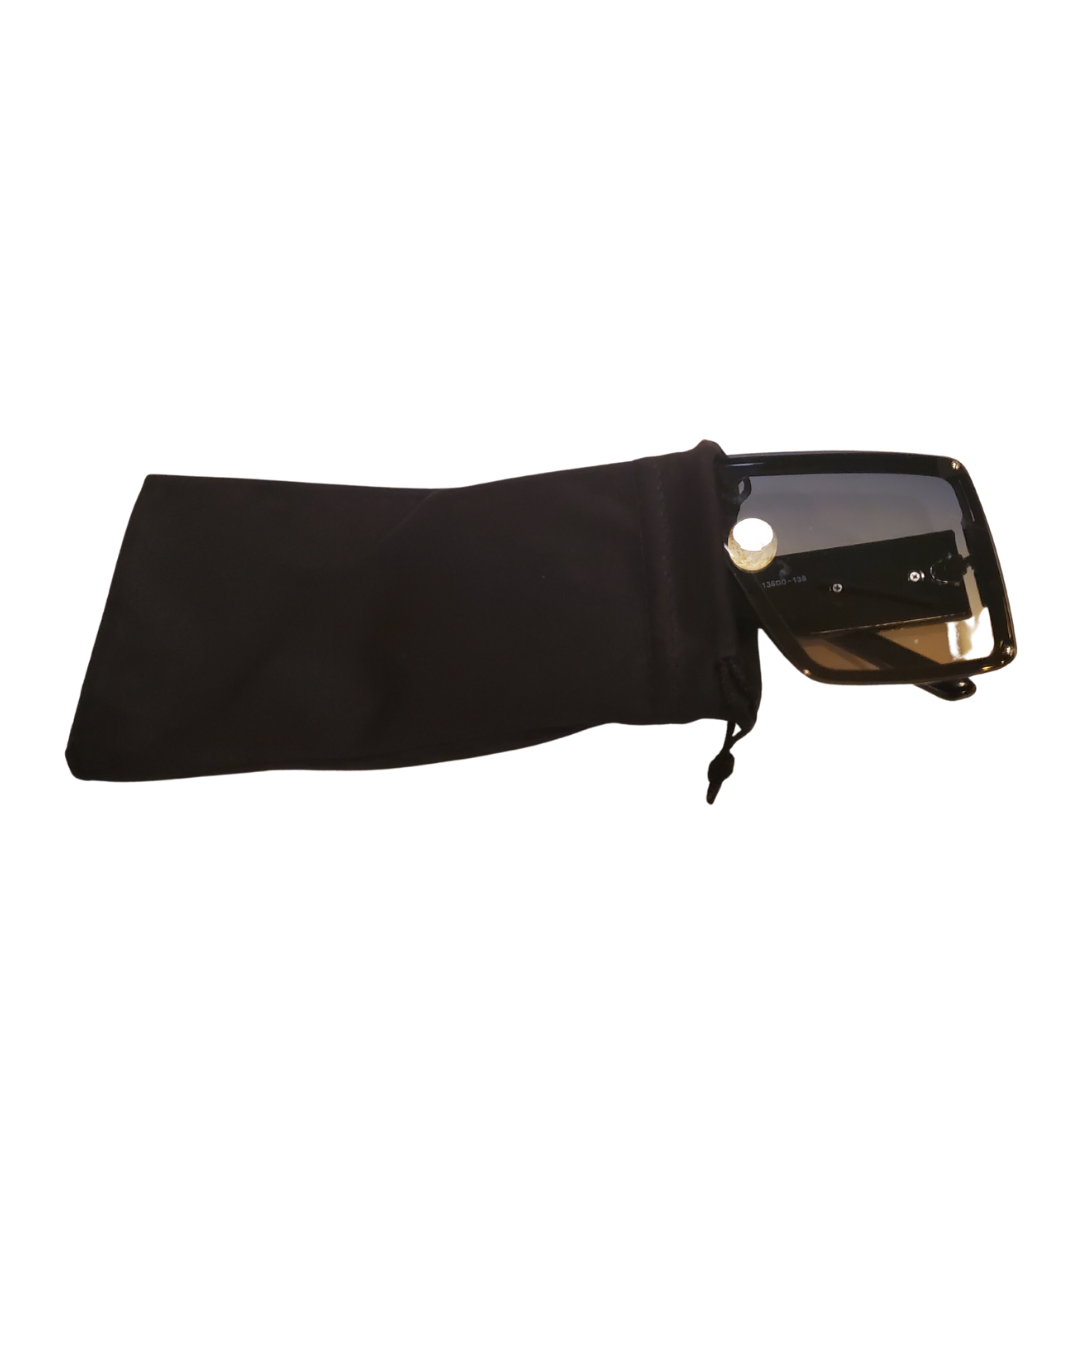 image of black and gray shades with the microfiber pouch 